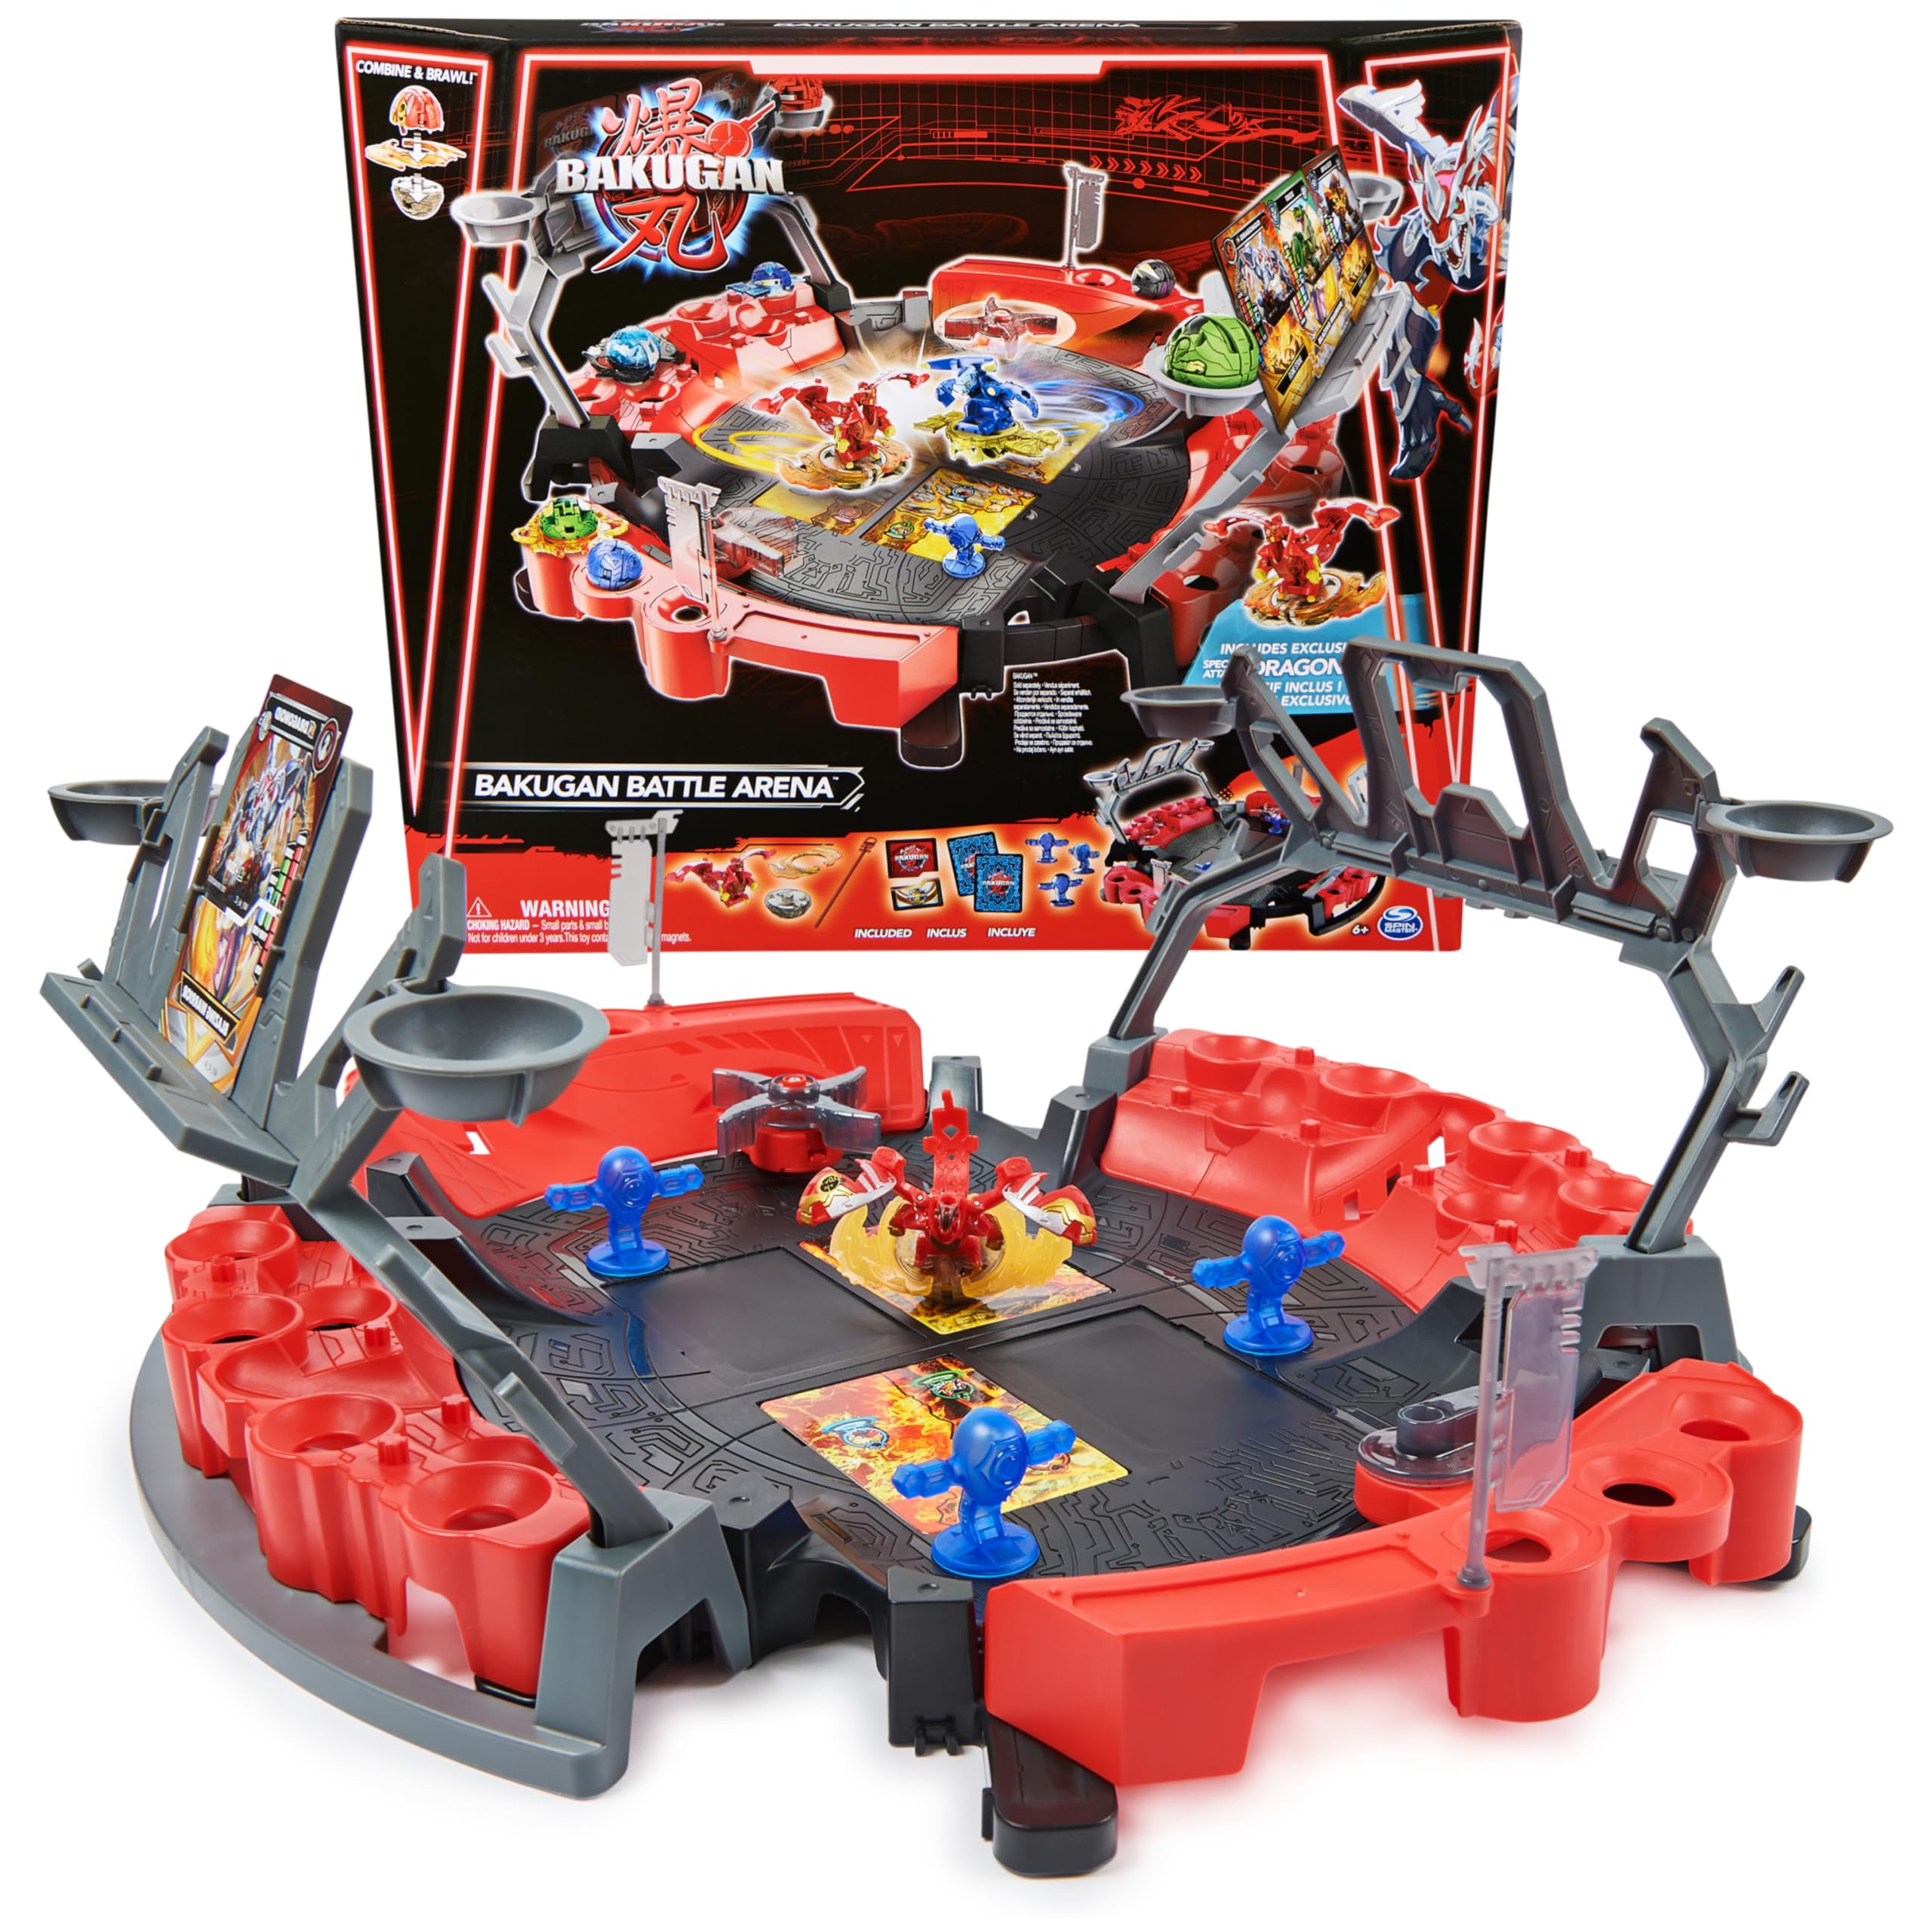 Bakugan Battle Arena Playset w/ Spinning Action Figure & Playset $6.74 + Free Shipping w/ Prime or on $35+